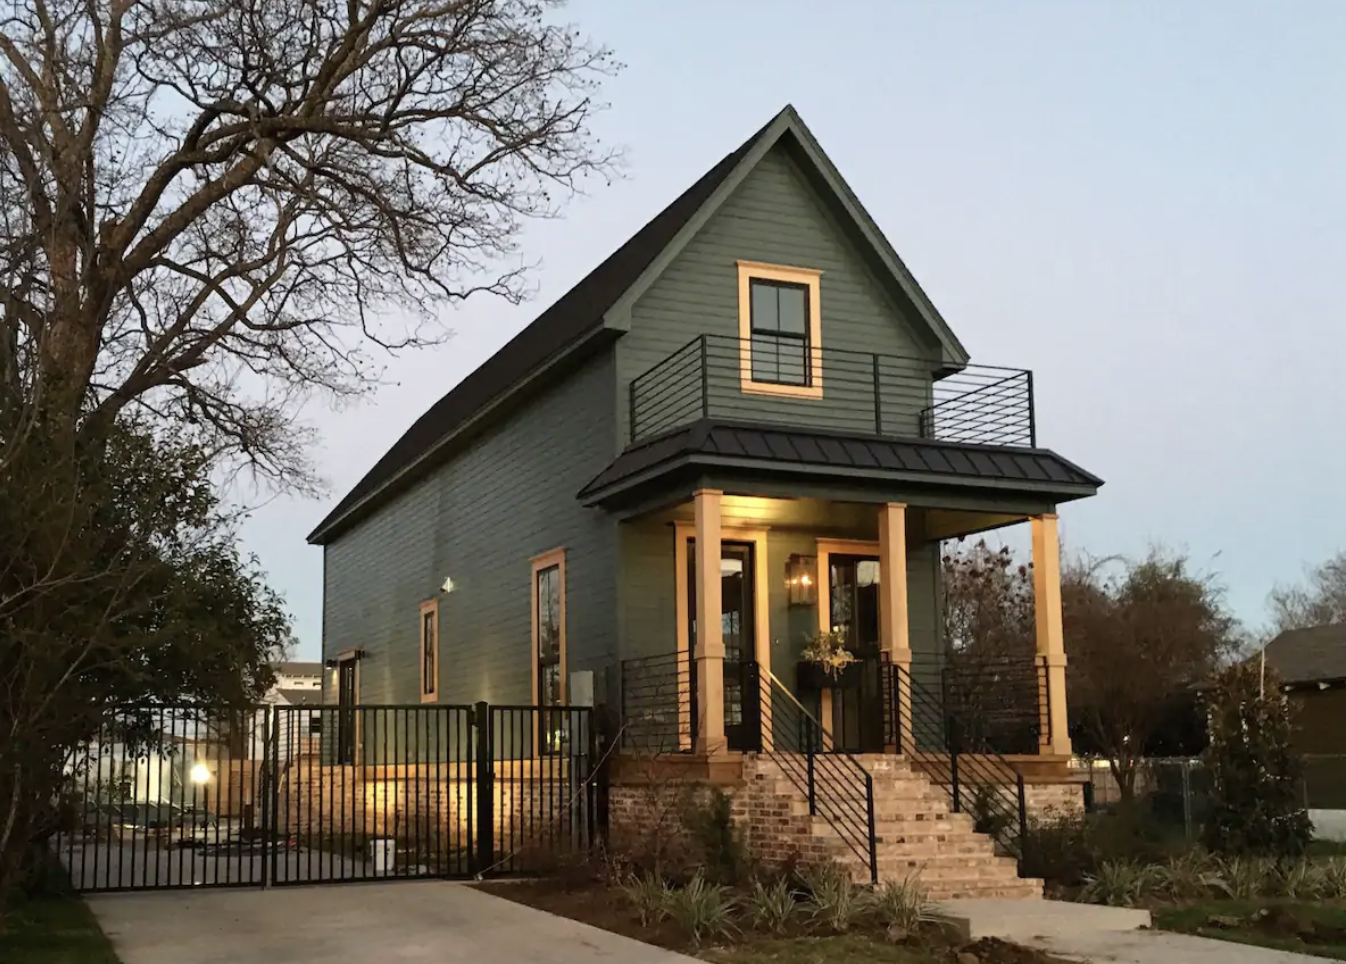 How We Built the Wrap Around Porch at our Waco Airbnb - MY 100 YEAR OLD HOME